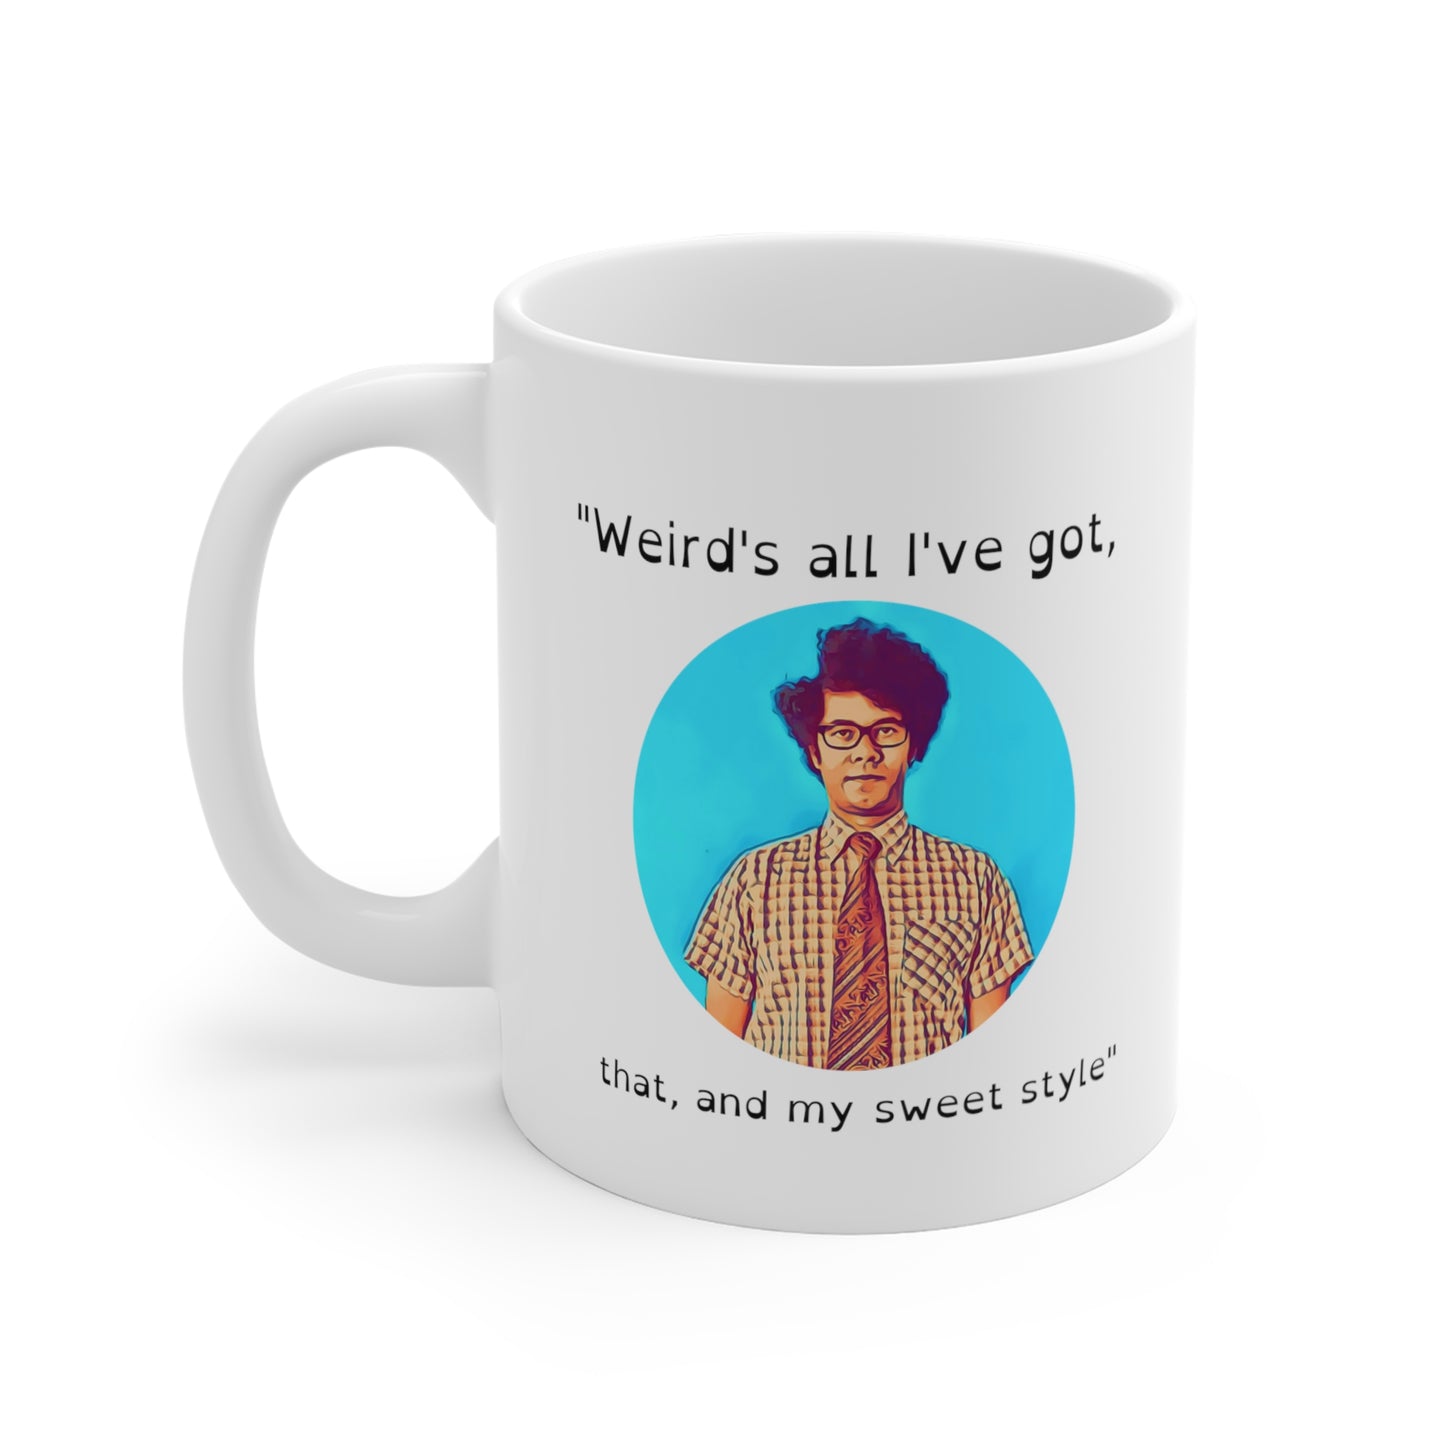 the IT crowd show mug - Maurice Moss funny quote mug - IT crowd fan gift - Geek chic gift - IT worker gift